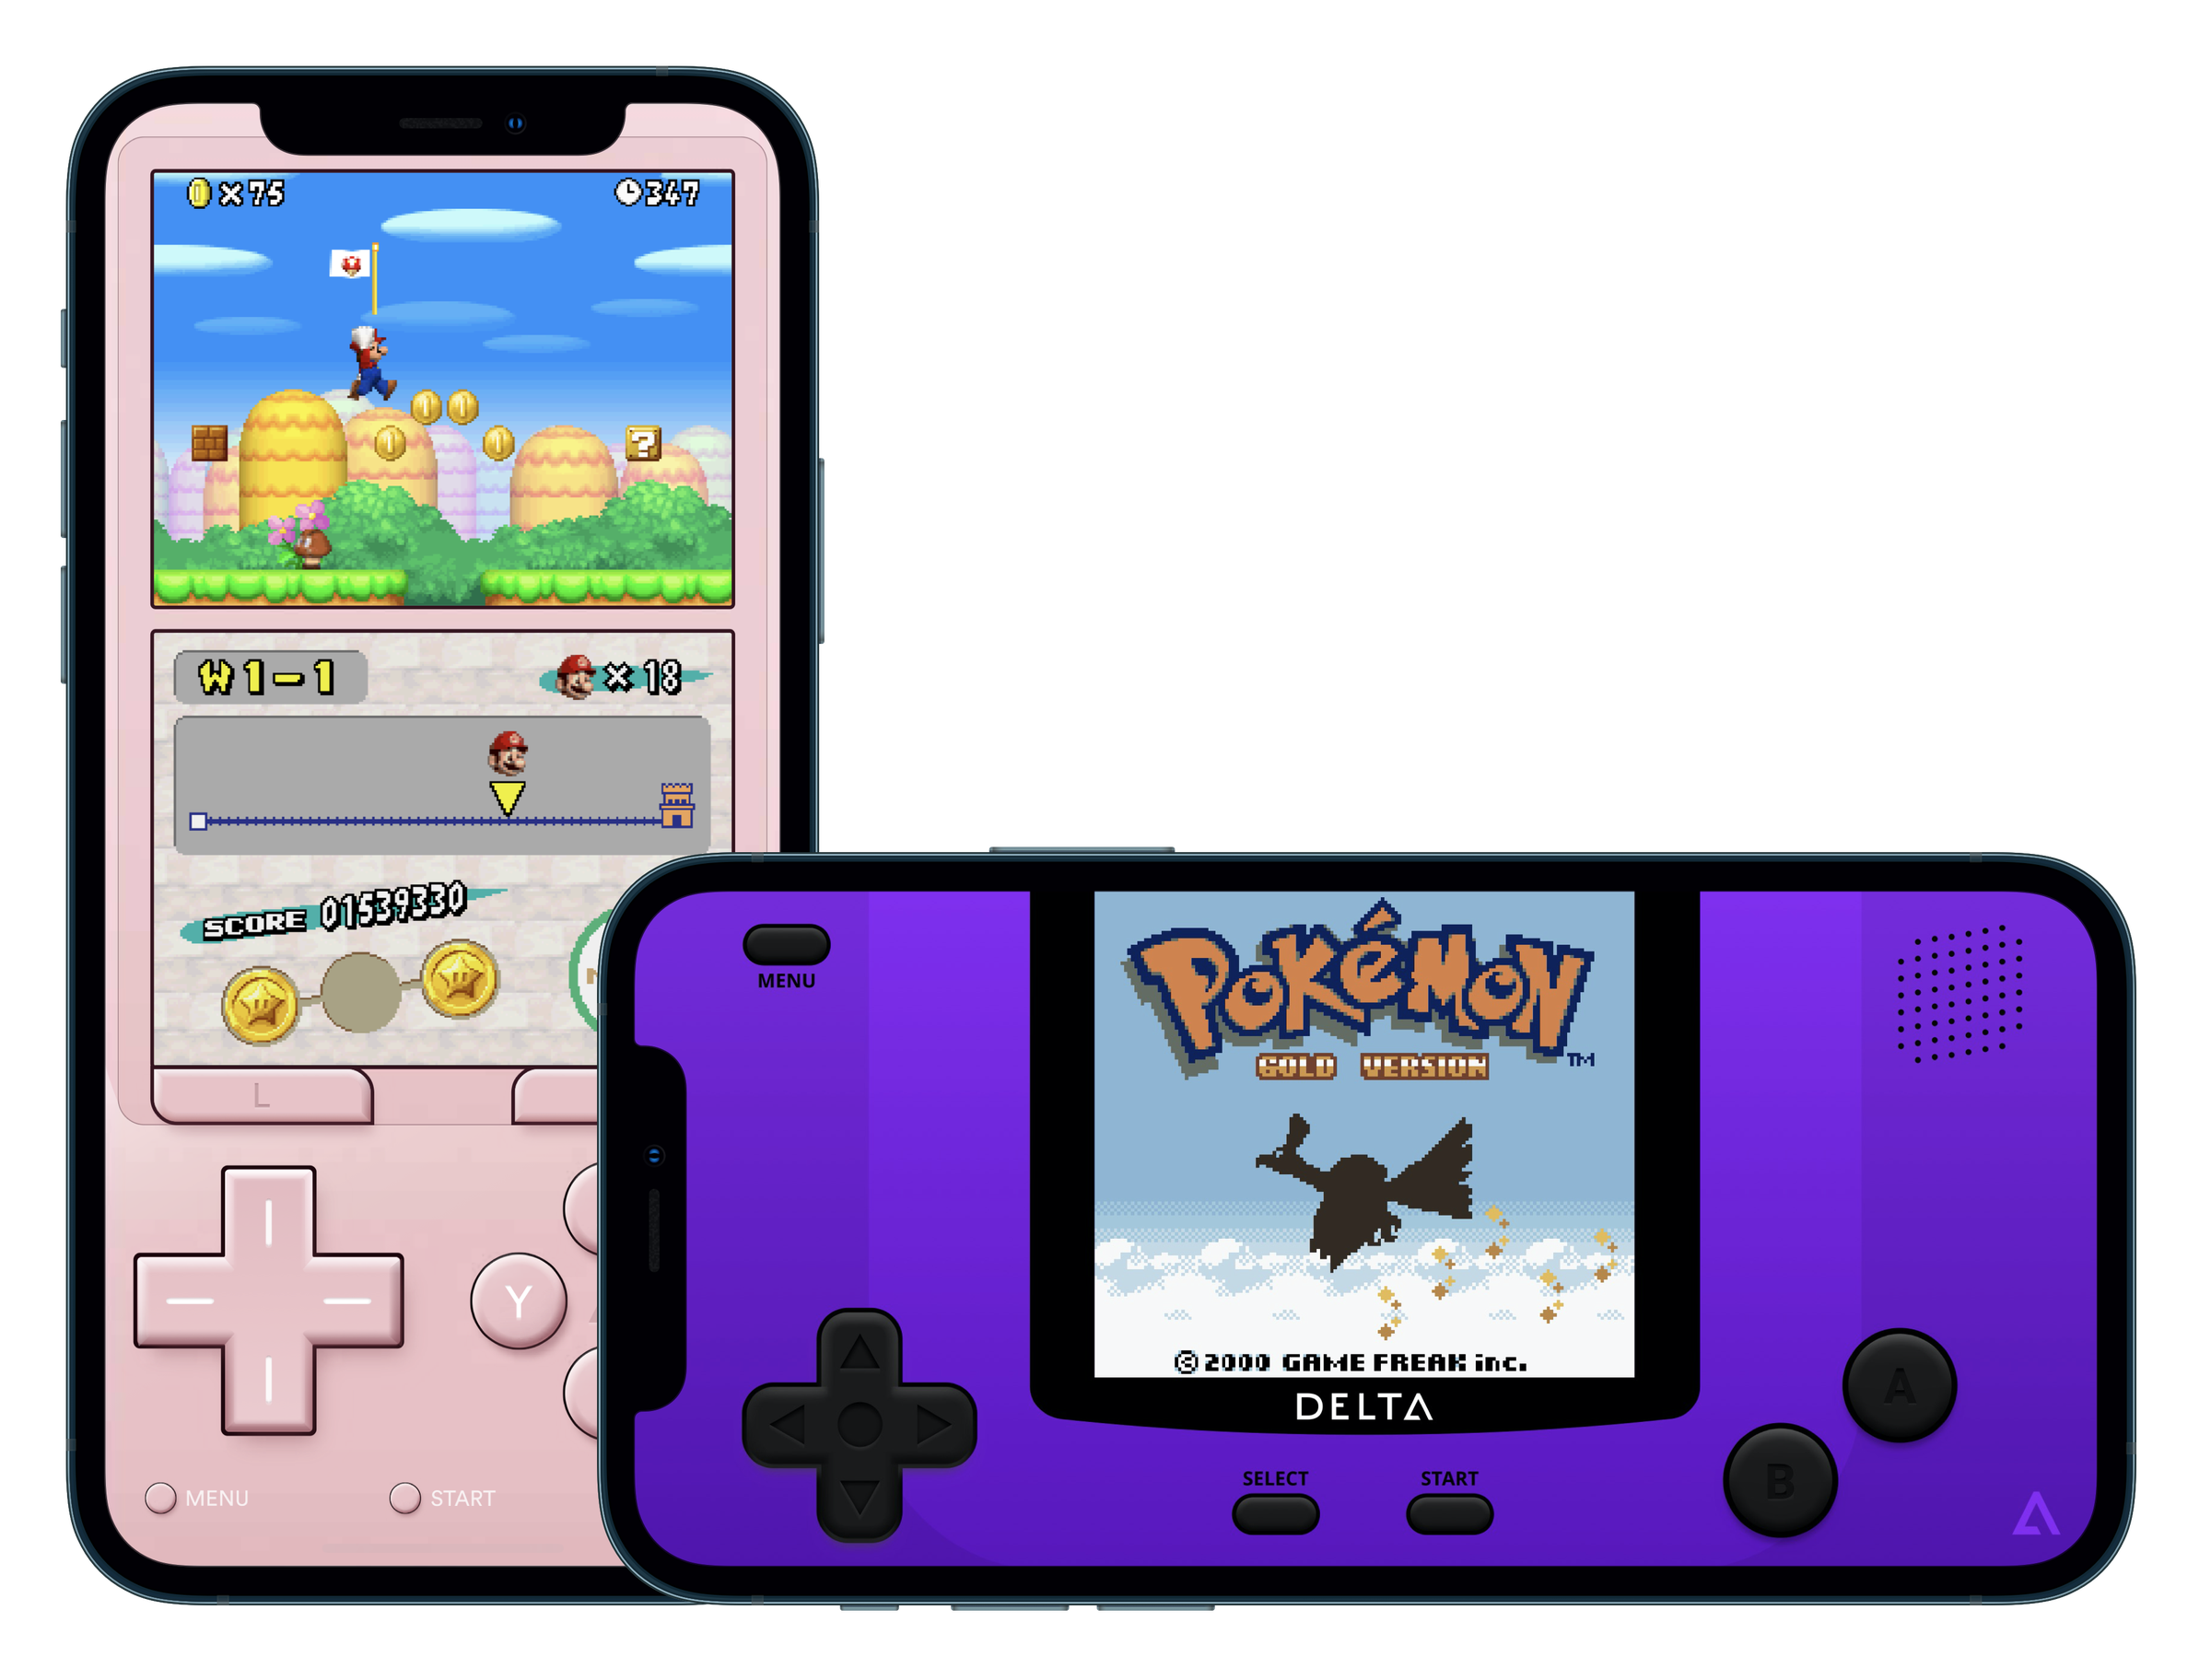 Screenshots of Delta running Nintendo DS and GBA games.